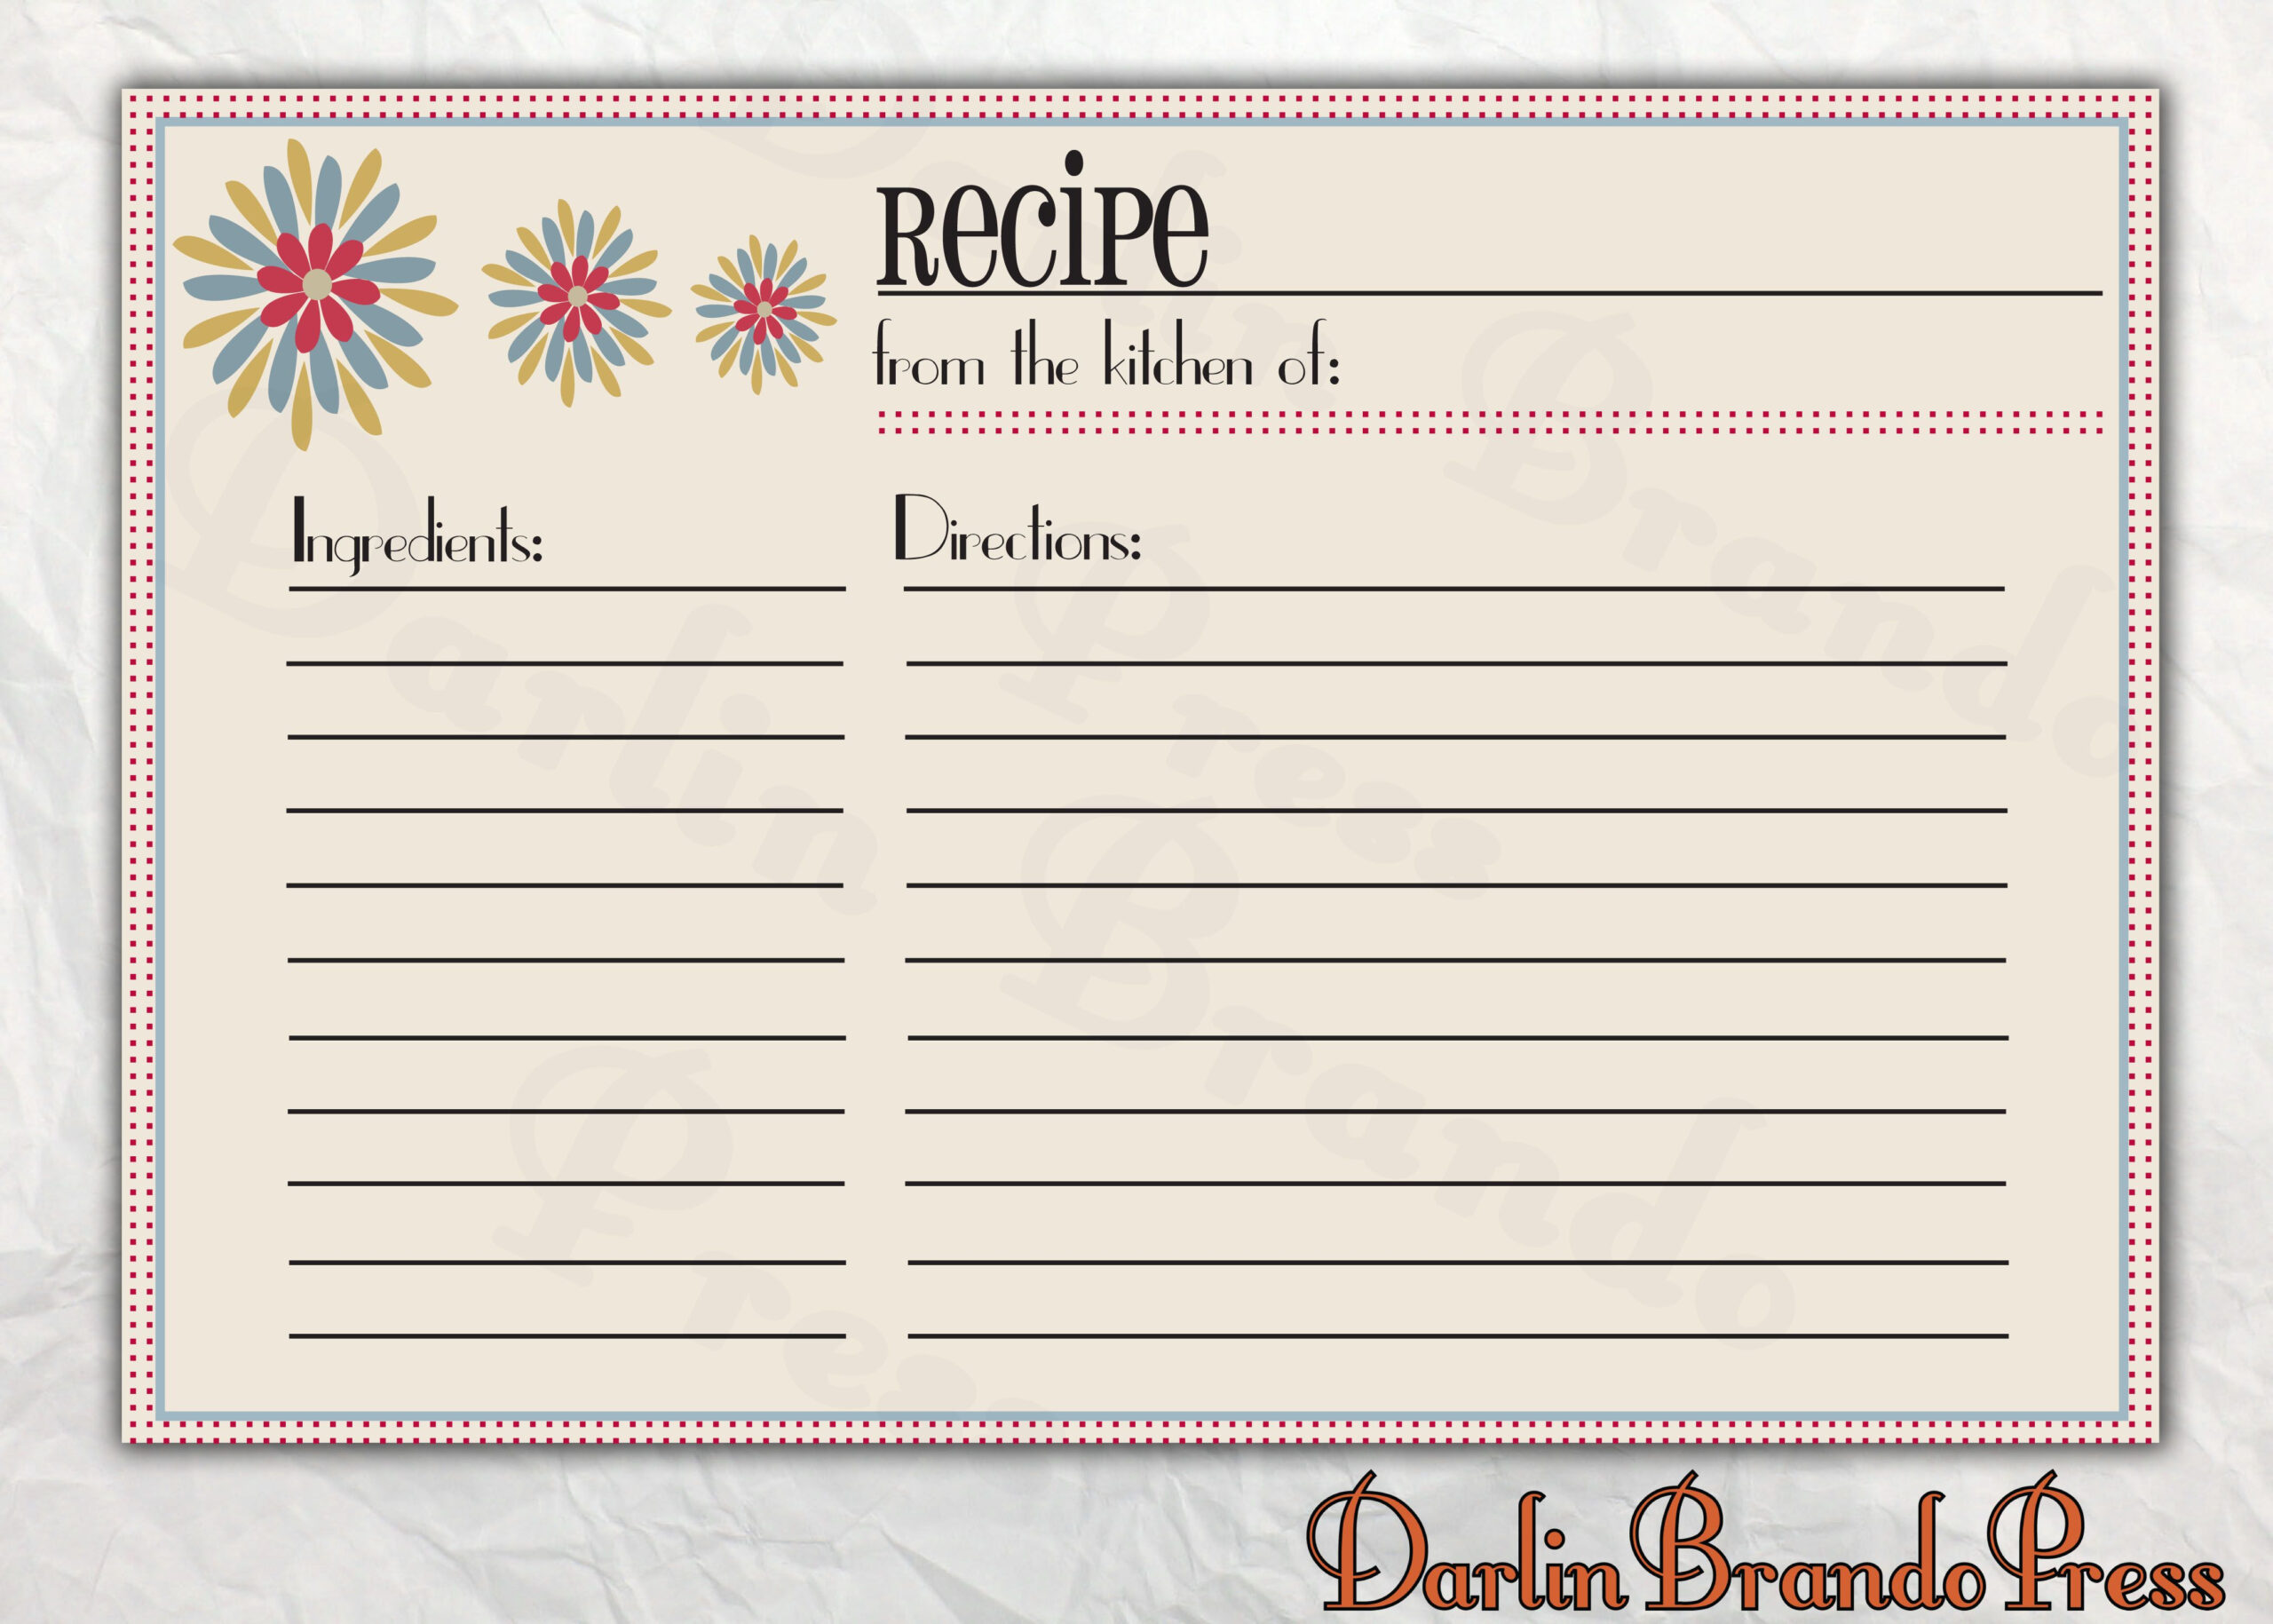 Free Editable Recipe Card Templates For Microsoft Word With Free Recipe Card Templates For Microsoft Word